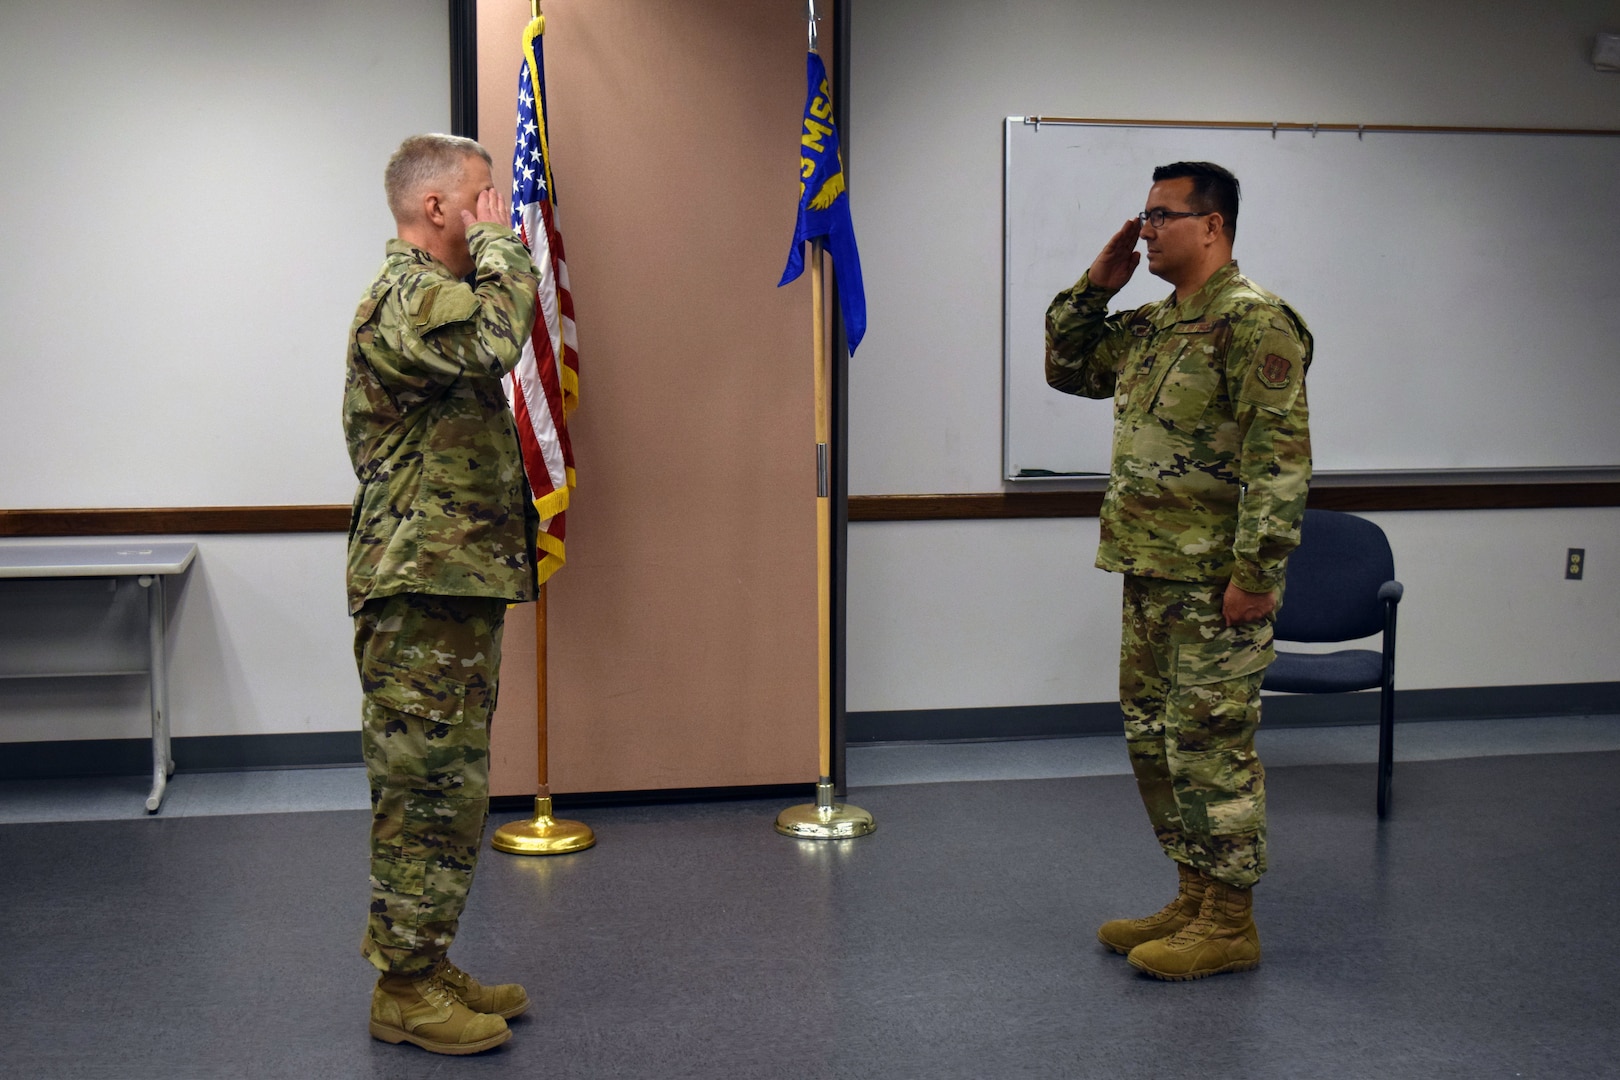 Lt. Col. Brian A. Angell, 433rd Logistics Readiness Squadron commander (right), salutes Col. Wayne M. Williams, 433rd Mission Support Group commander, during a change of command ceremony at Joint Base San Antonio-Lackland, Texas, June 6, 2020.